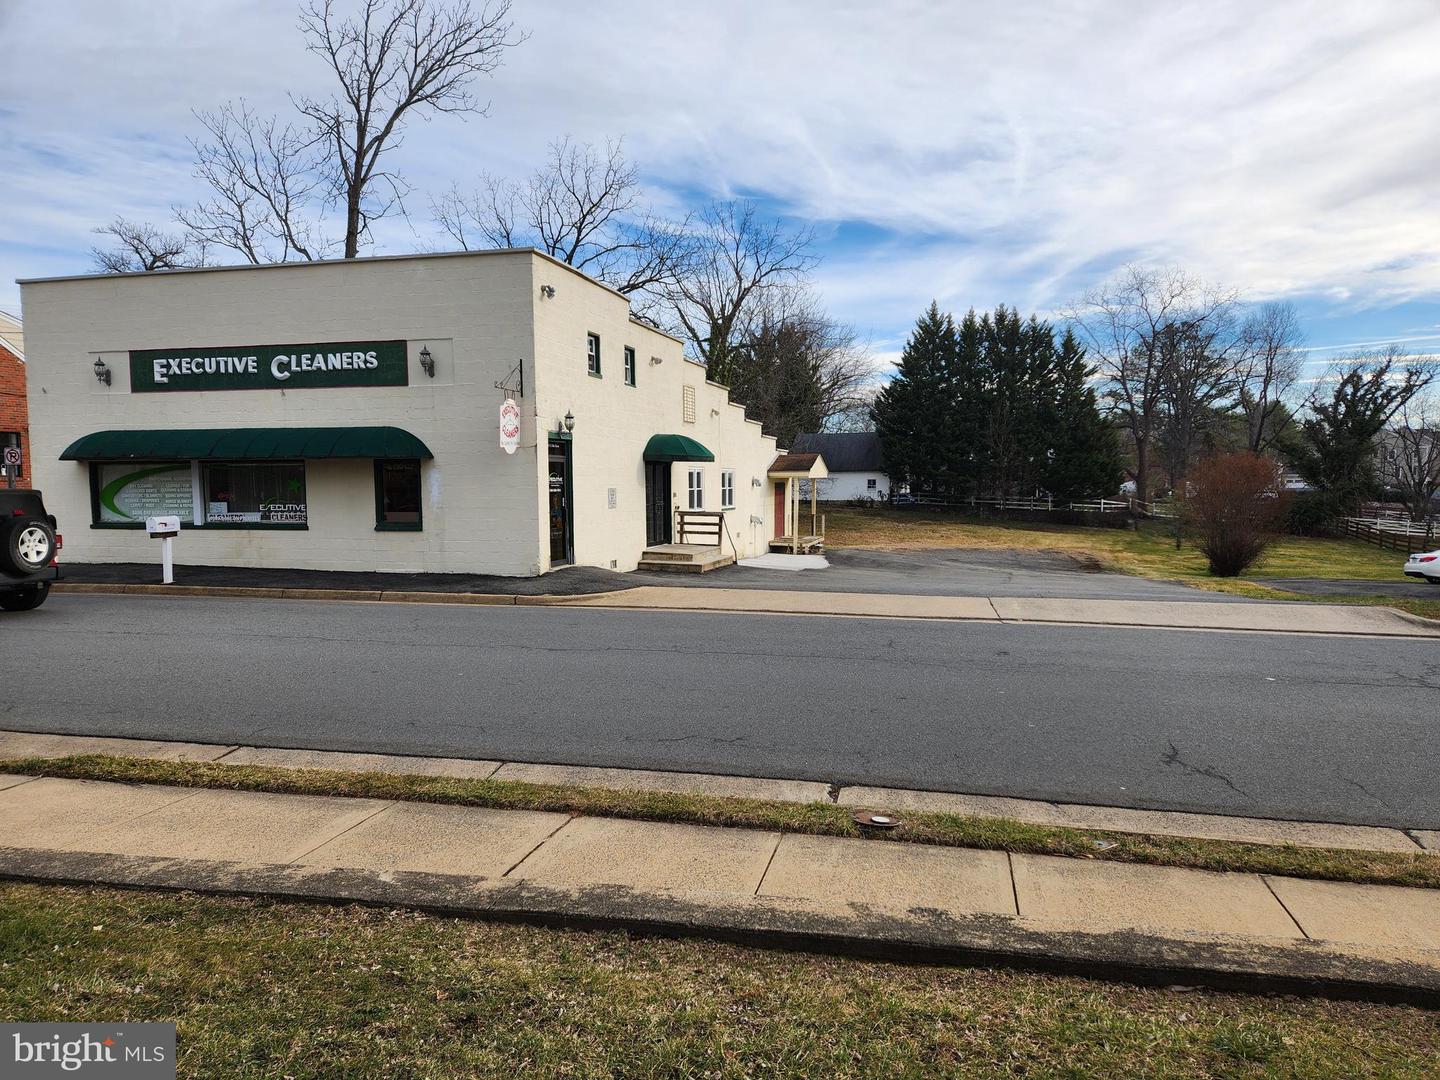 140 S 20TH ST, PURCELLVILLE, Virginia 20132, ,Land,For sale,140 S 20TH ST,VALO2017242 MLS # VALO2017242